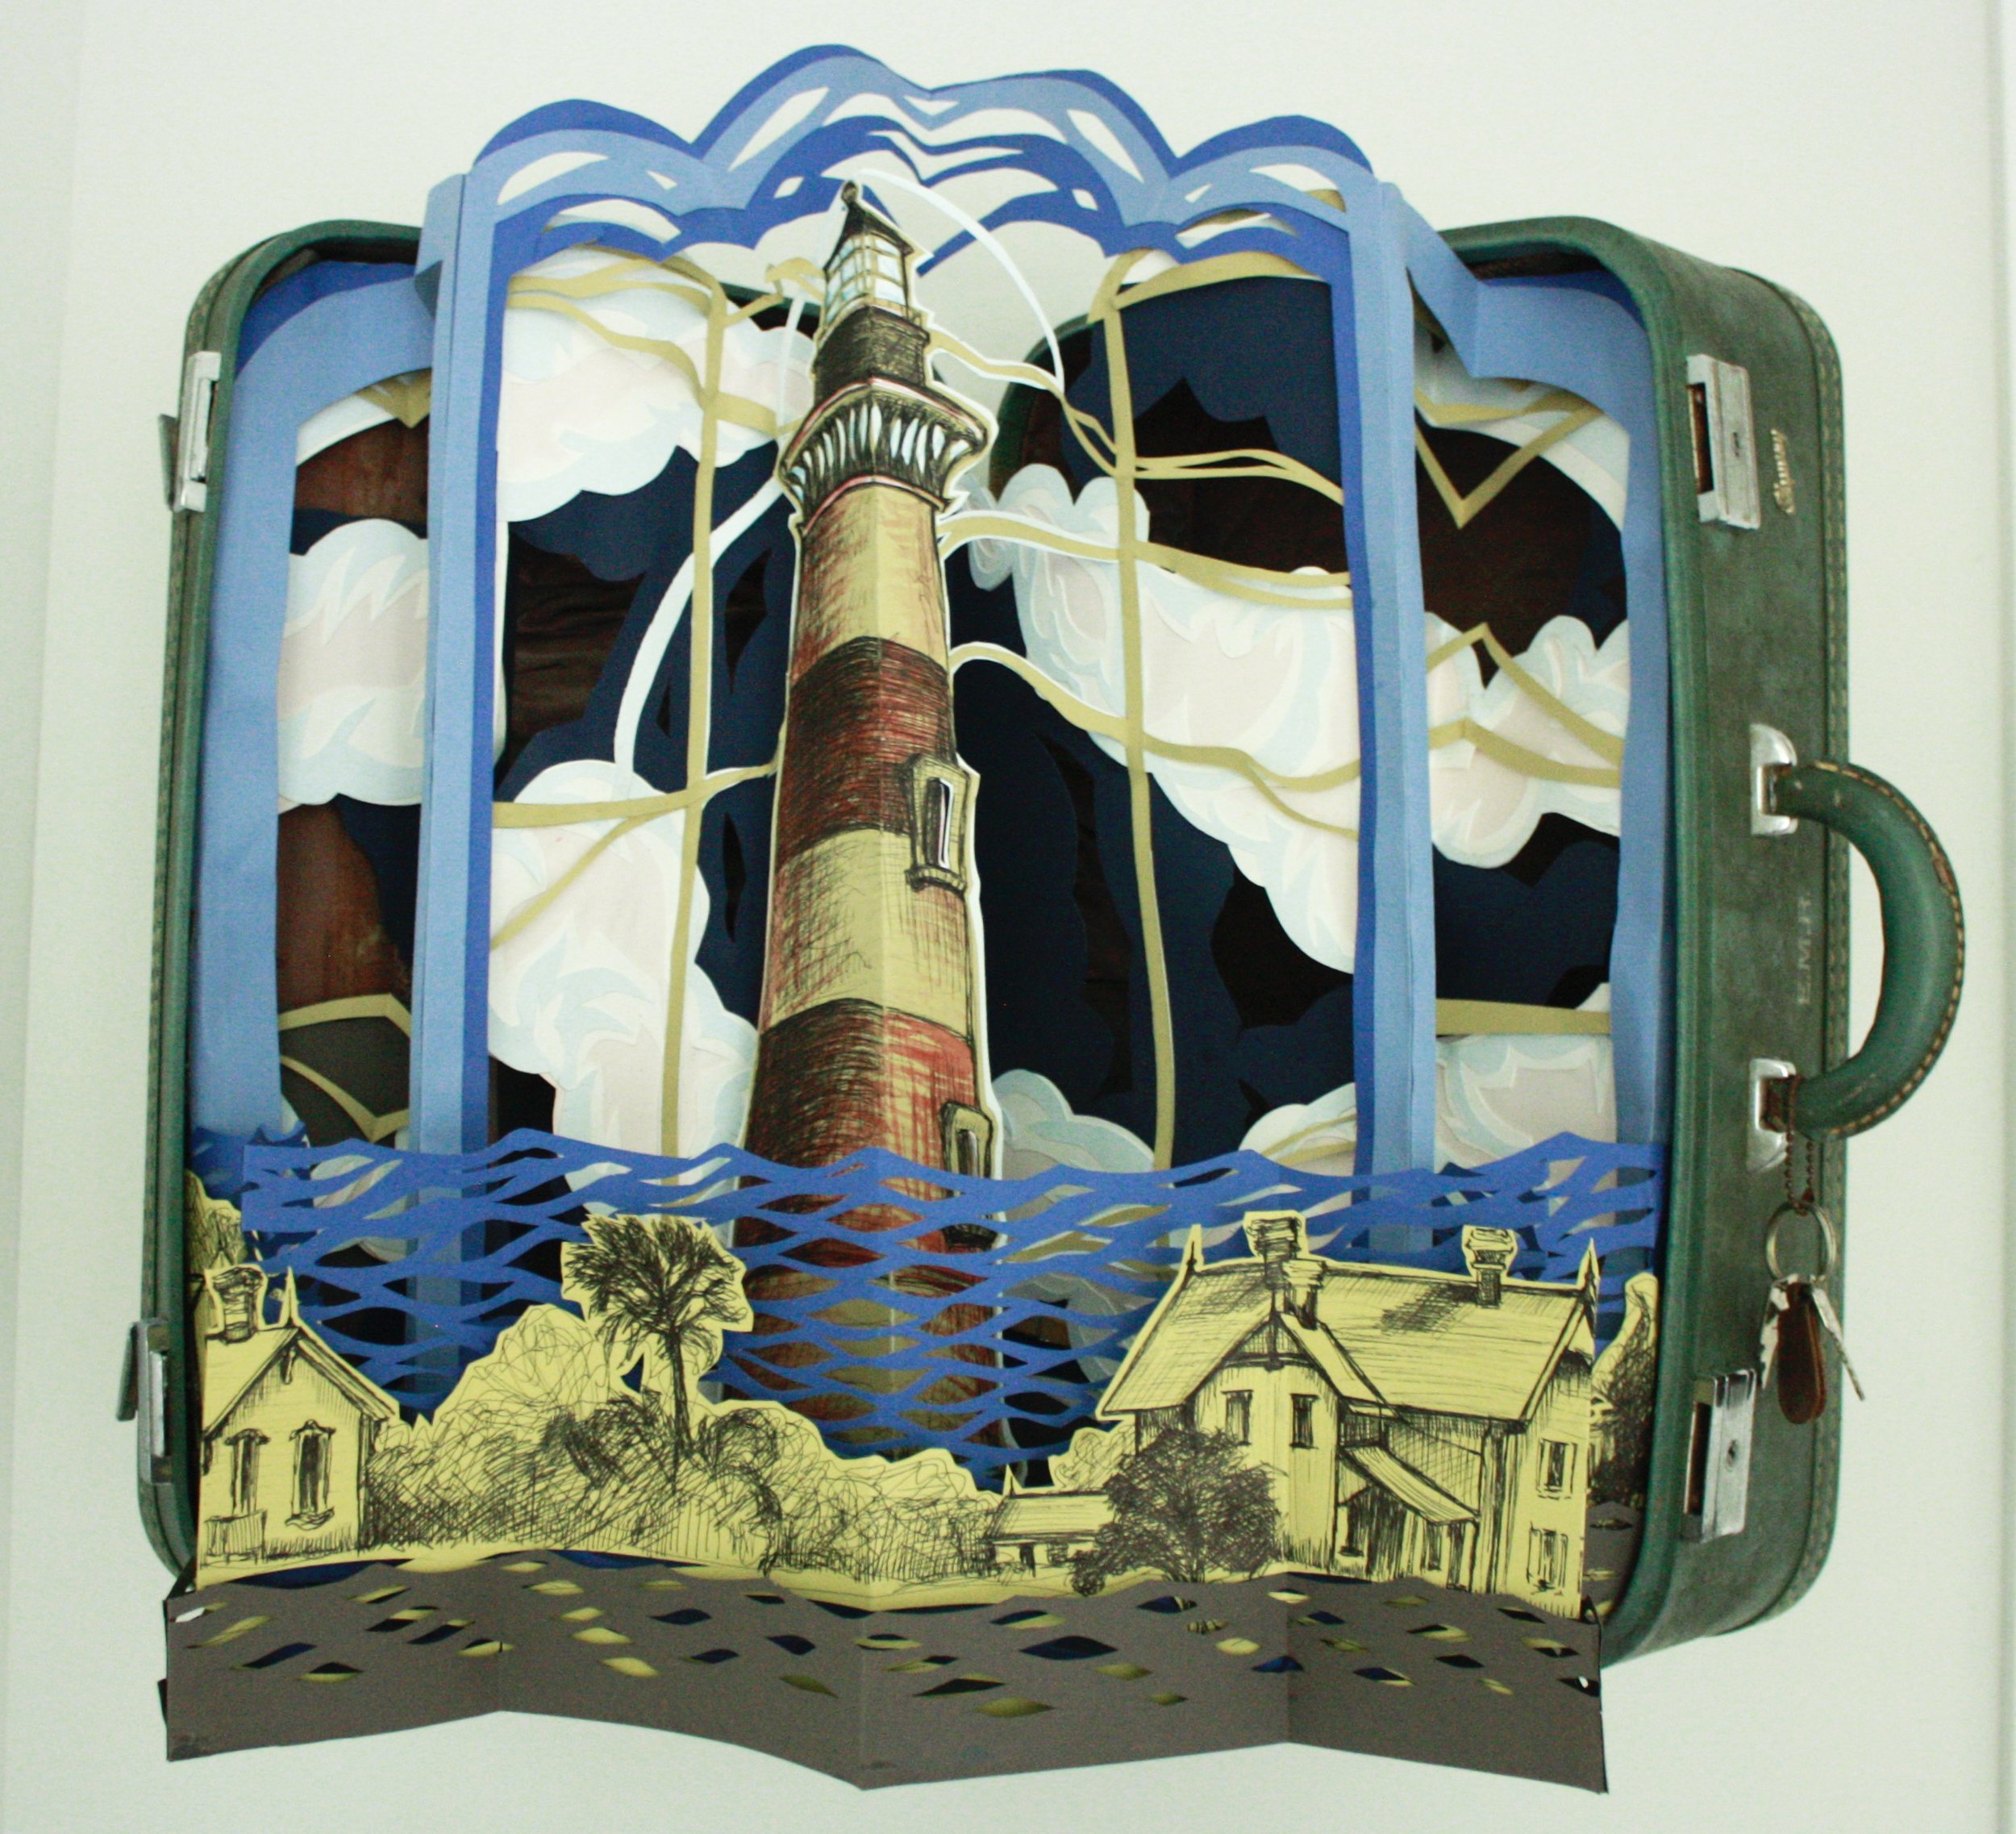 "Out to Sea" papercut & ink in vintage suitcase, 25"h x 26"w x 16"d, 2021